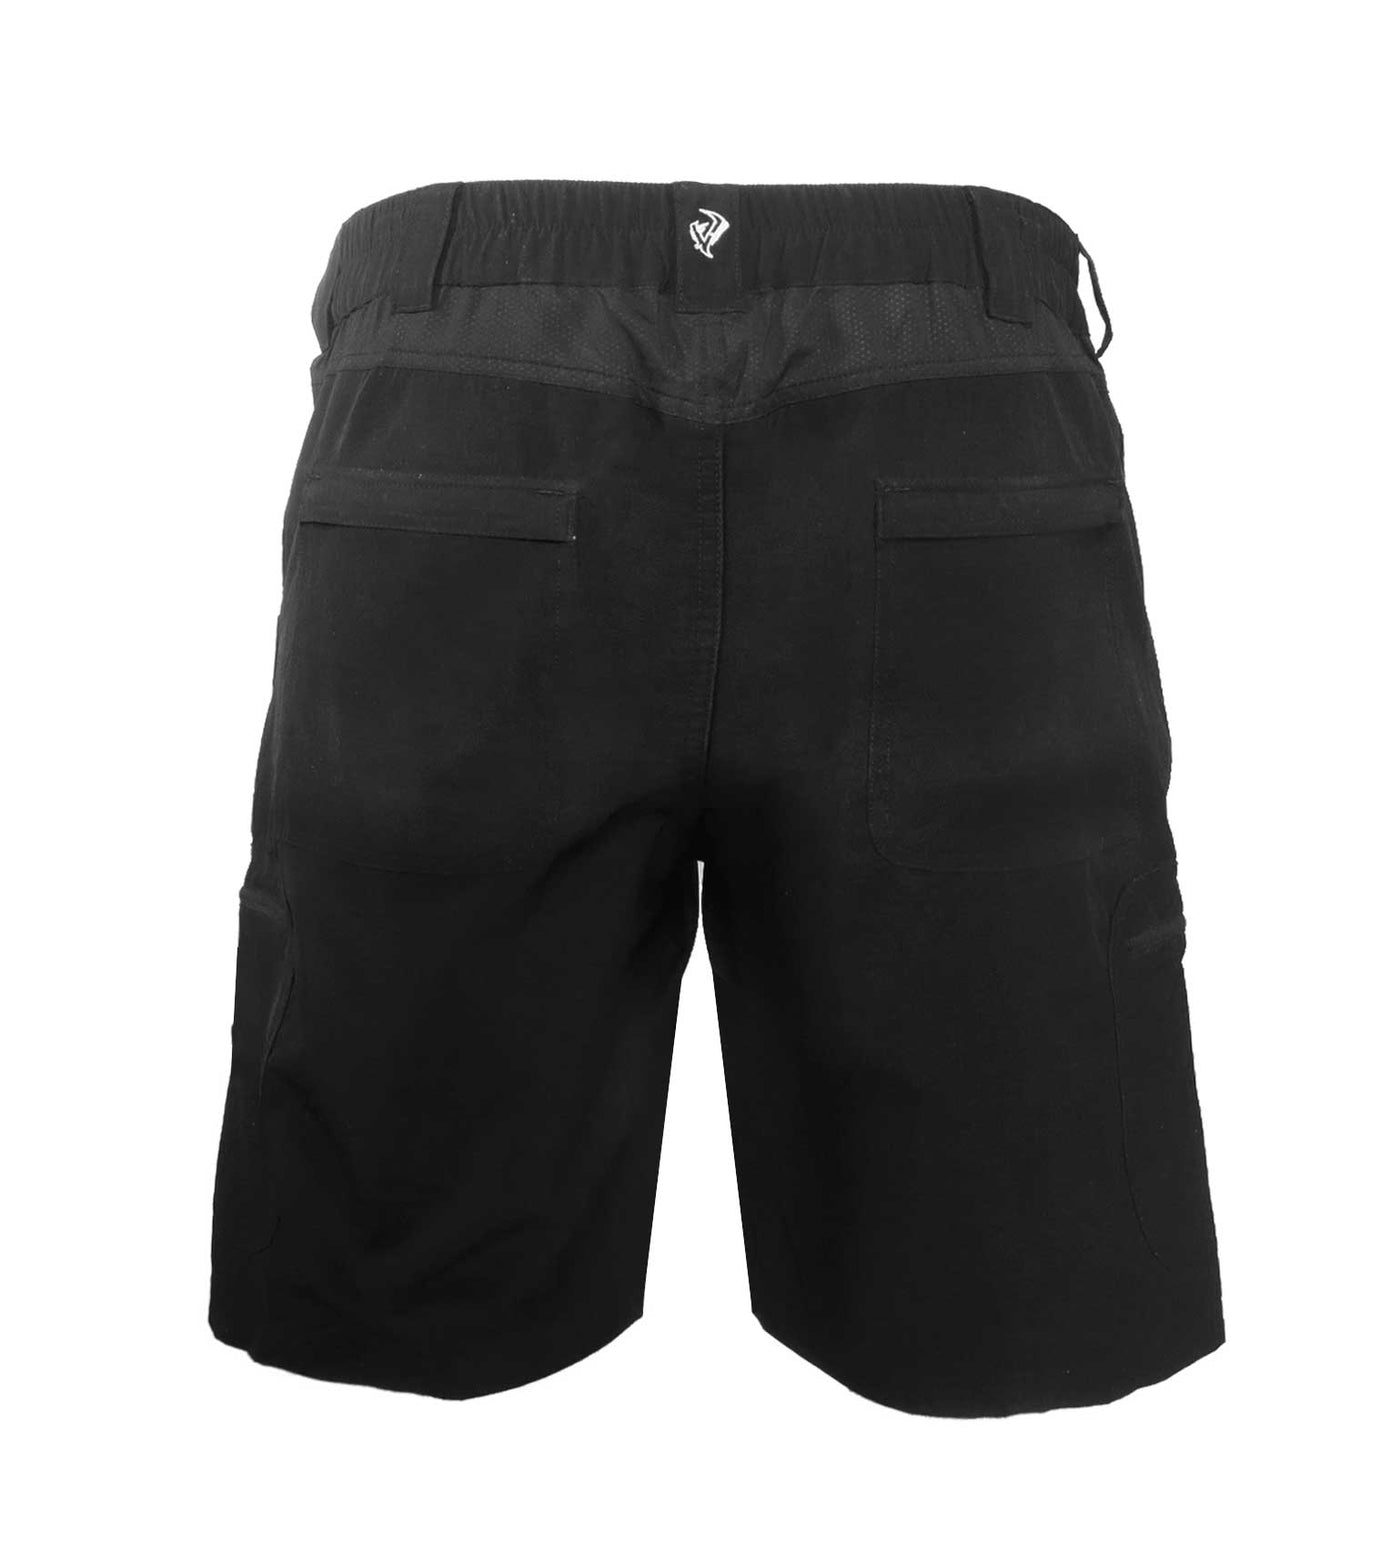 Connor Shorts - Vycah